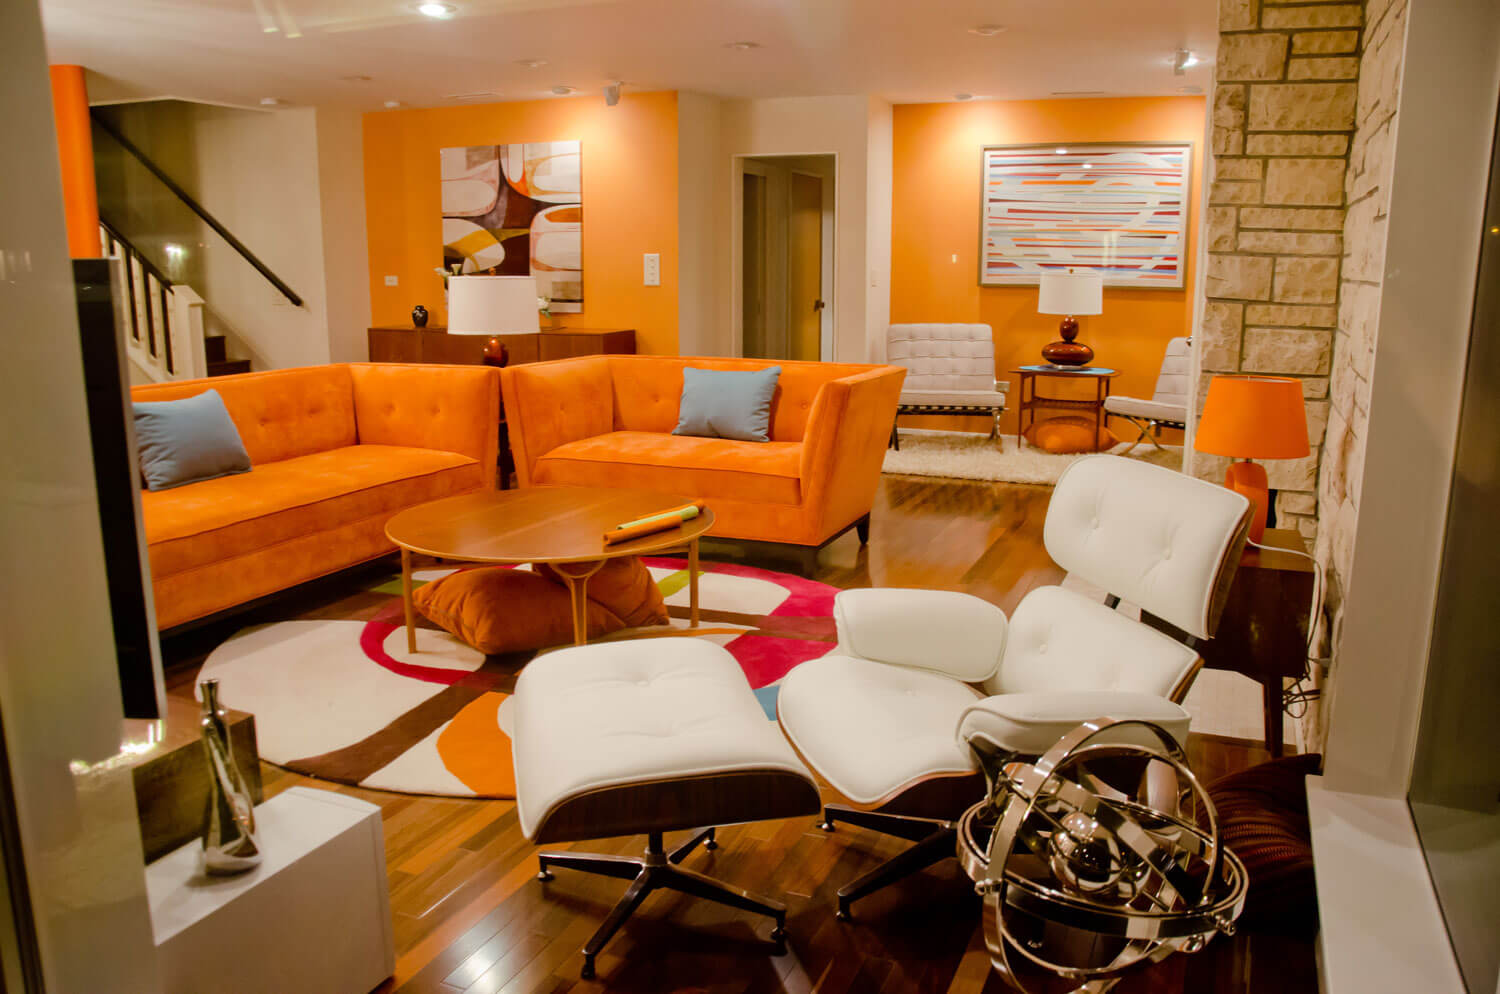 great burnt orange wall color. would like to have as ...